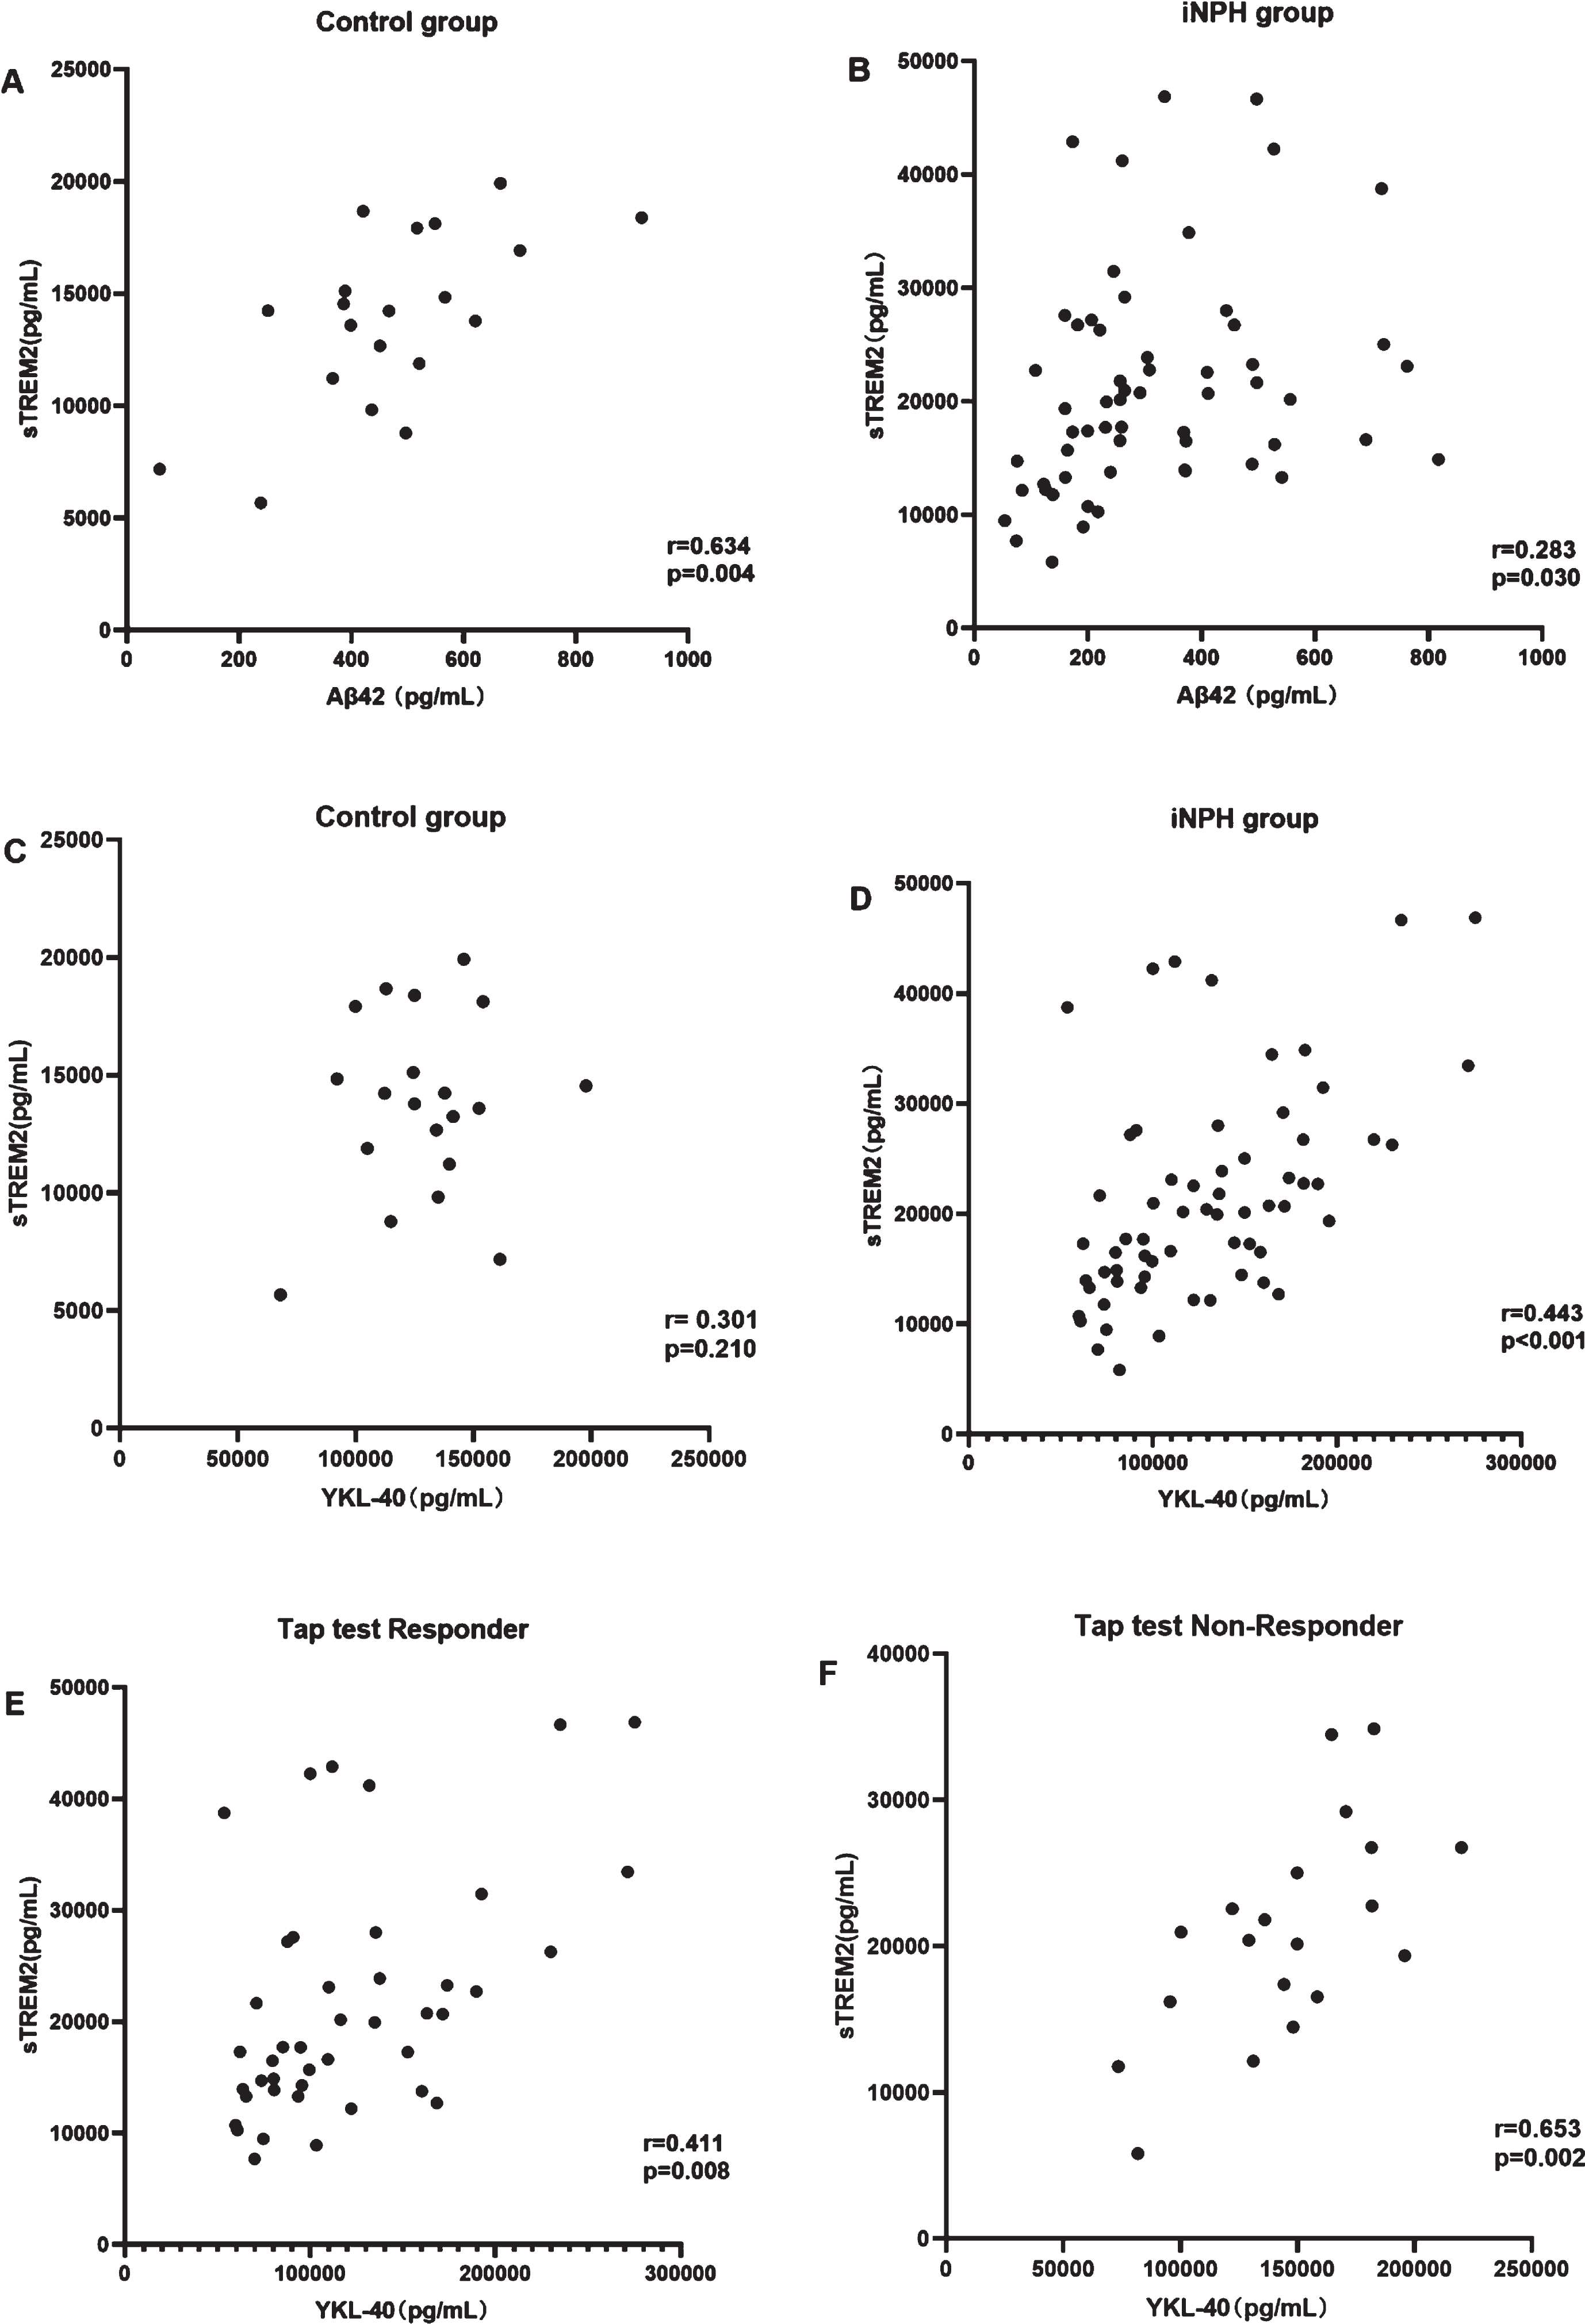 Correlation analysis among CSF biomarkers. A, B) sTREM2 and Aβ42. C-F sTREM2 and YKL-40. CSF sTREM2 levels (A) are correlated with CSF Aβ42 levels in the control group (r = 0.634, p = 0.004), (B) but not in the iNPH group (r = 0.283, p = 0.030). CSF YKL-40 levels are (C) not positively correlated with CSF sTREM2 levels in the control group but are (D) correlated in the iNPH group (r = 0.443, p < 0.001), (E) tap test responders (r = 0.411, p = 0.008), and (F) tap test non-responders (r = 0.653, p = 0.002).